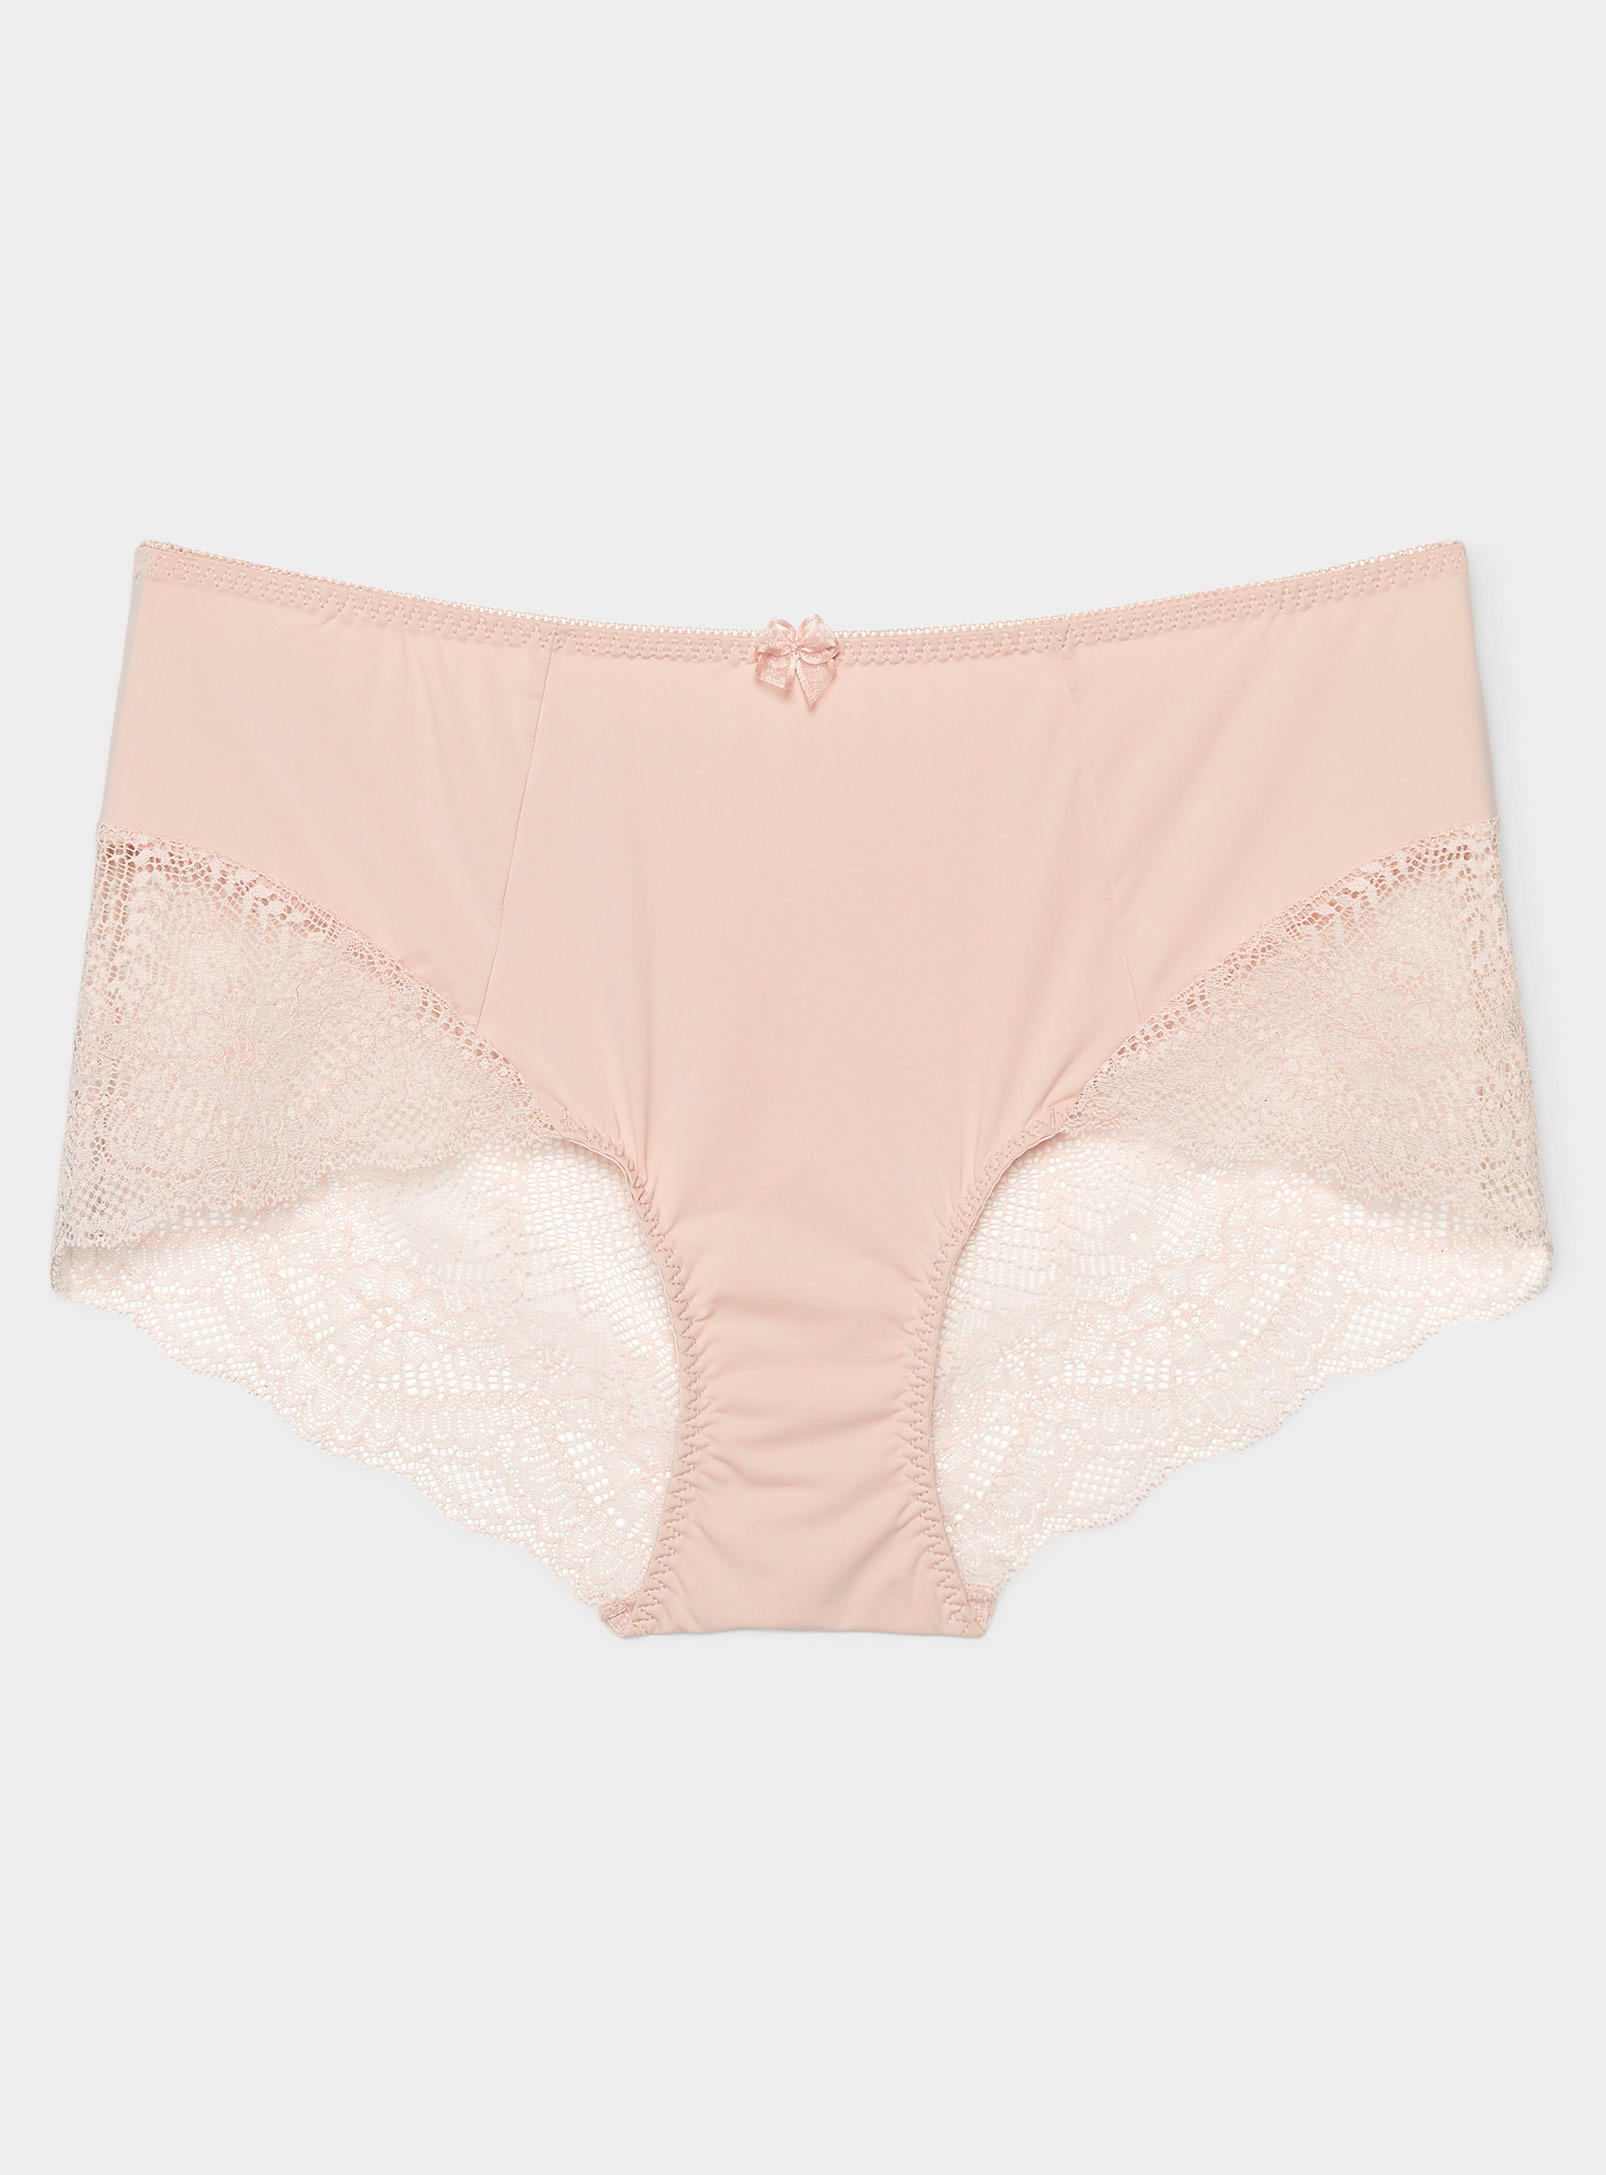 Wonderbra Lace Inserts Recycled Nylon Hipster In Pink